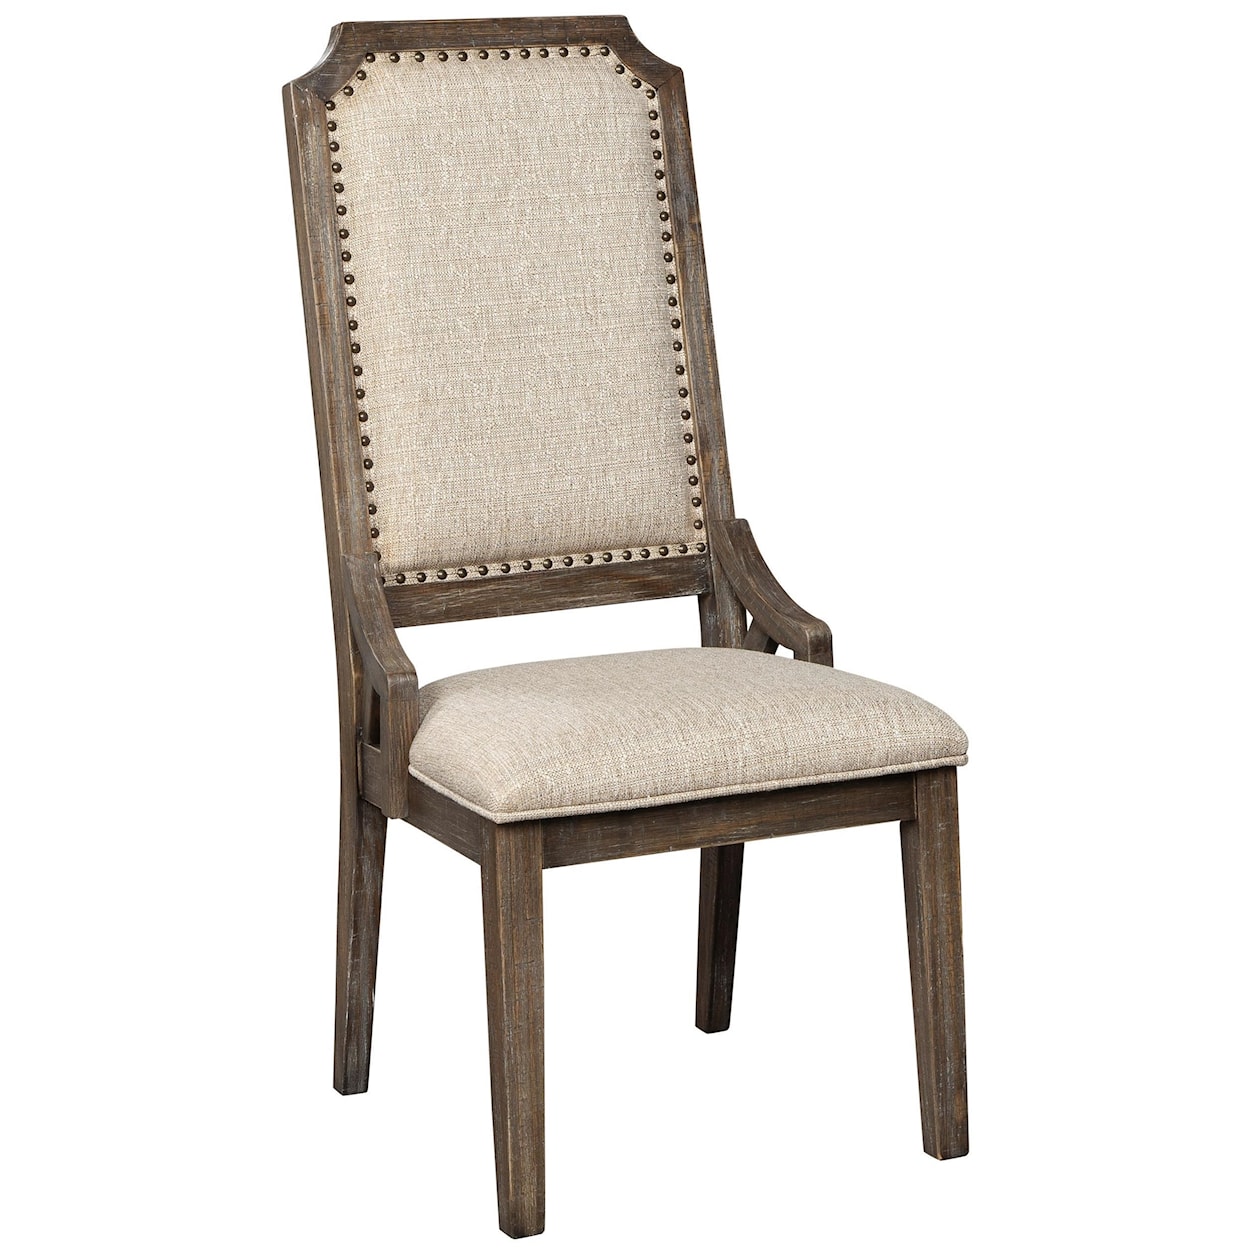 Ashley Signature Design Wyndahl Dining Upholstered Side Chair